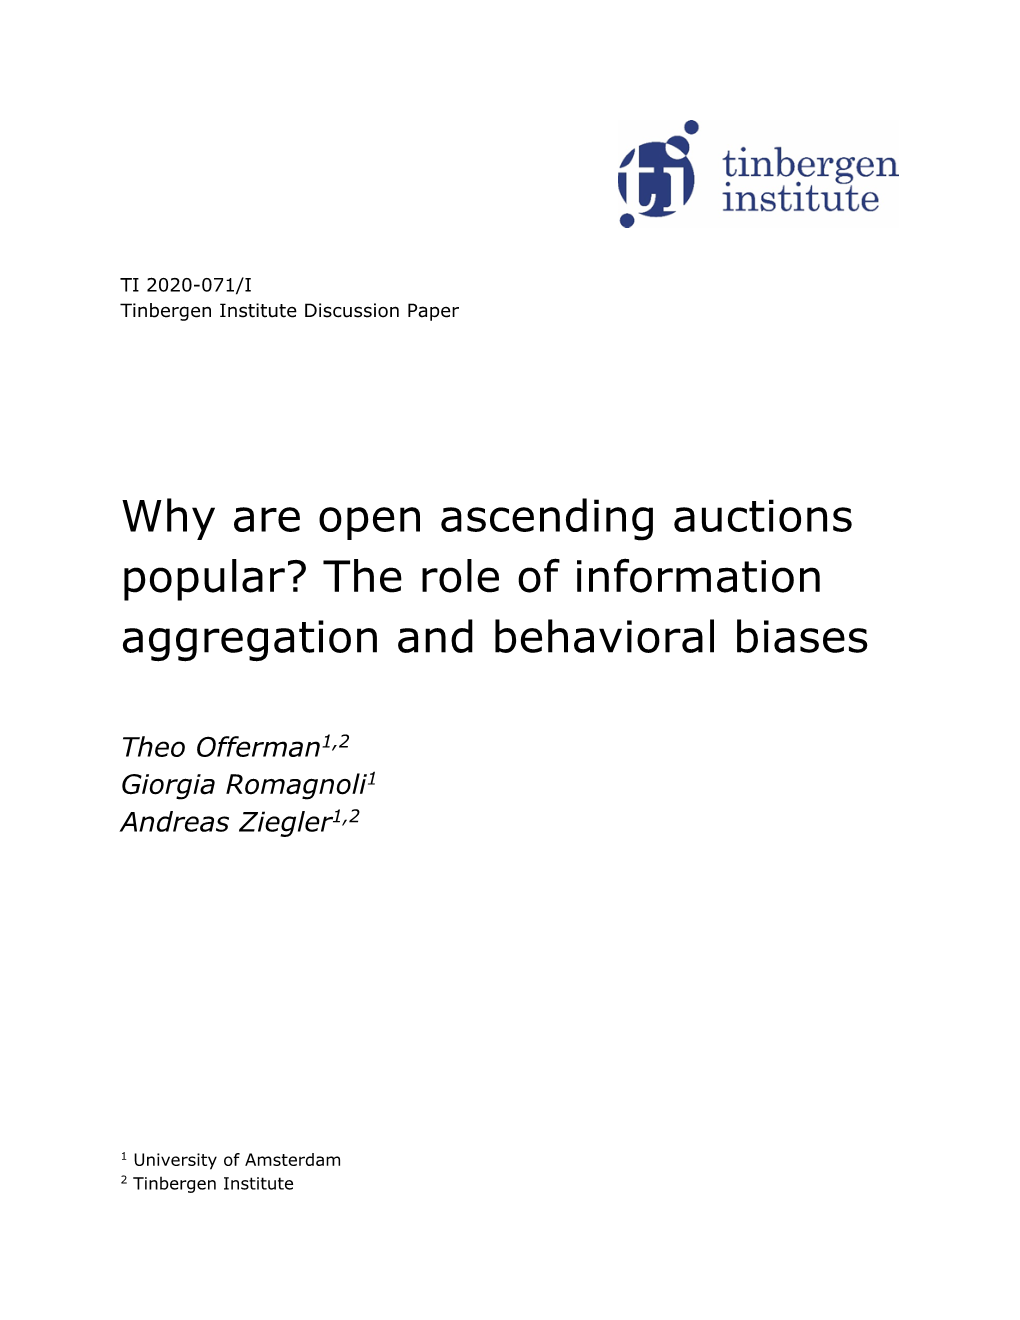 Why Are Open Ascending Auctions Popular? the Role of Information Aggregation and Behavioral Biases